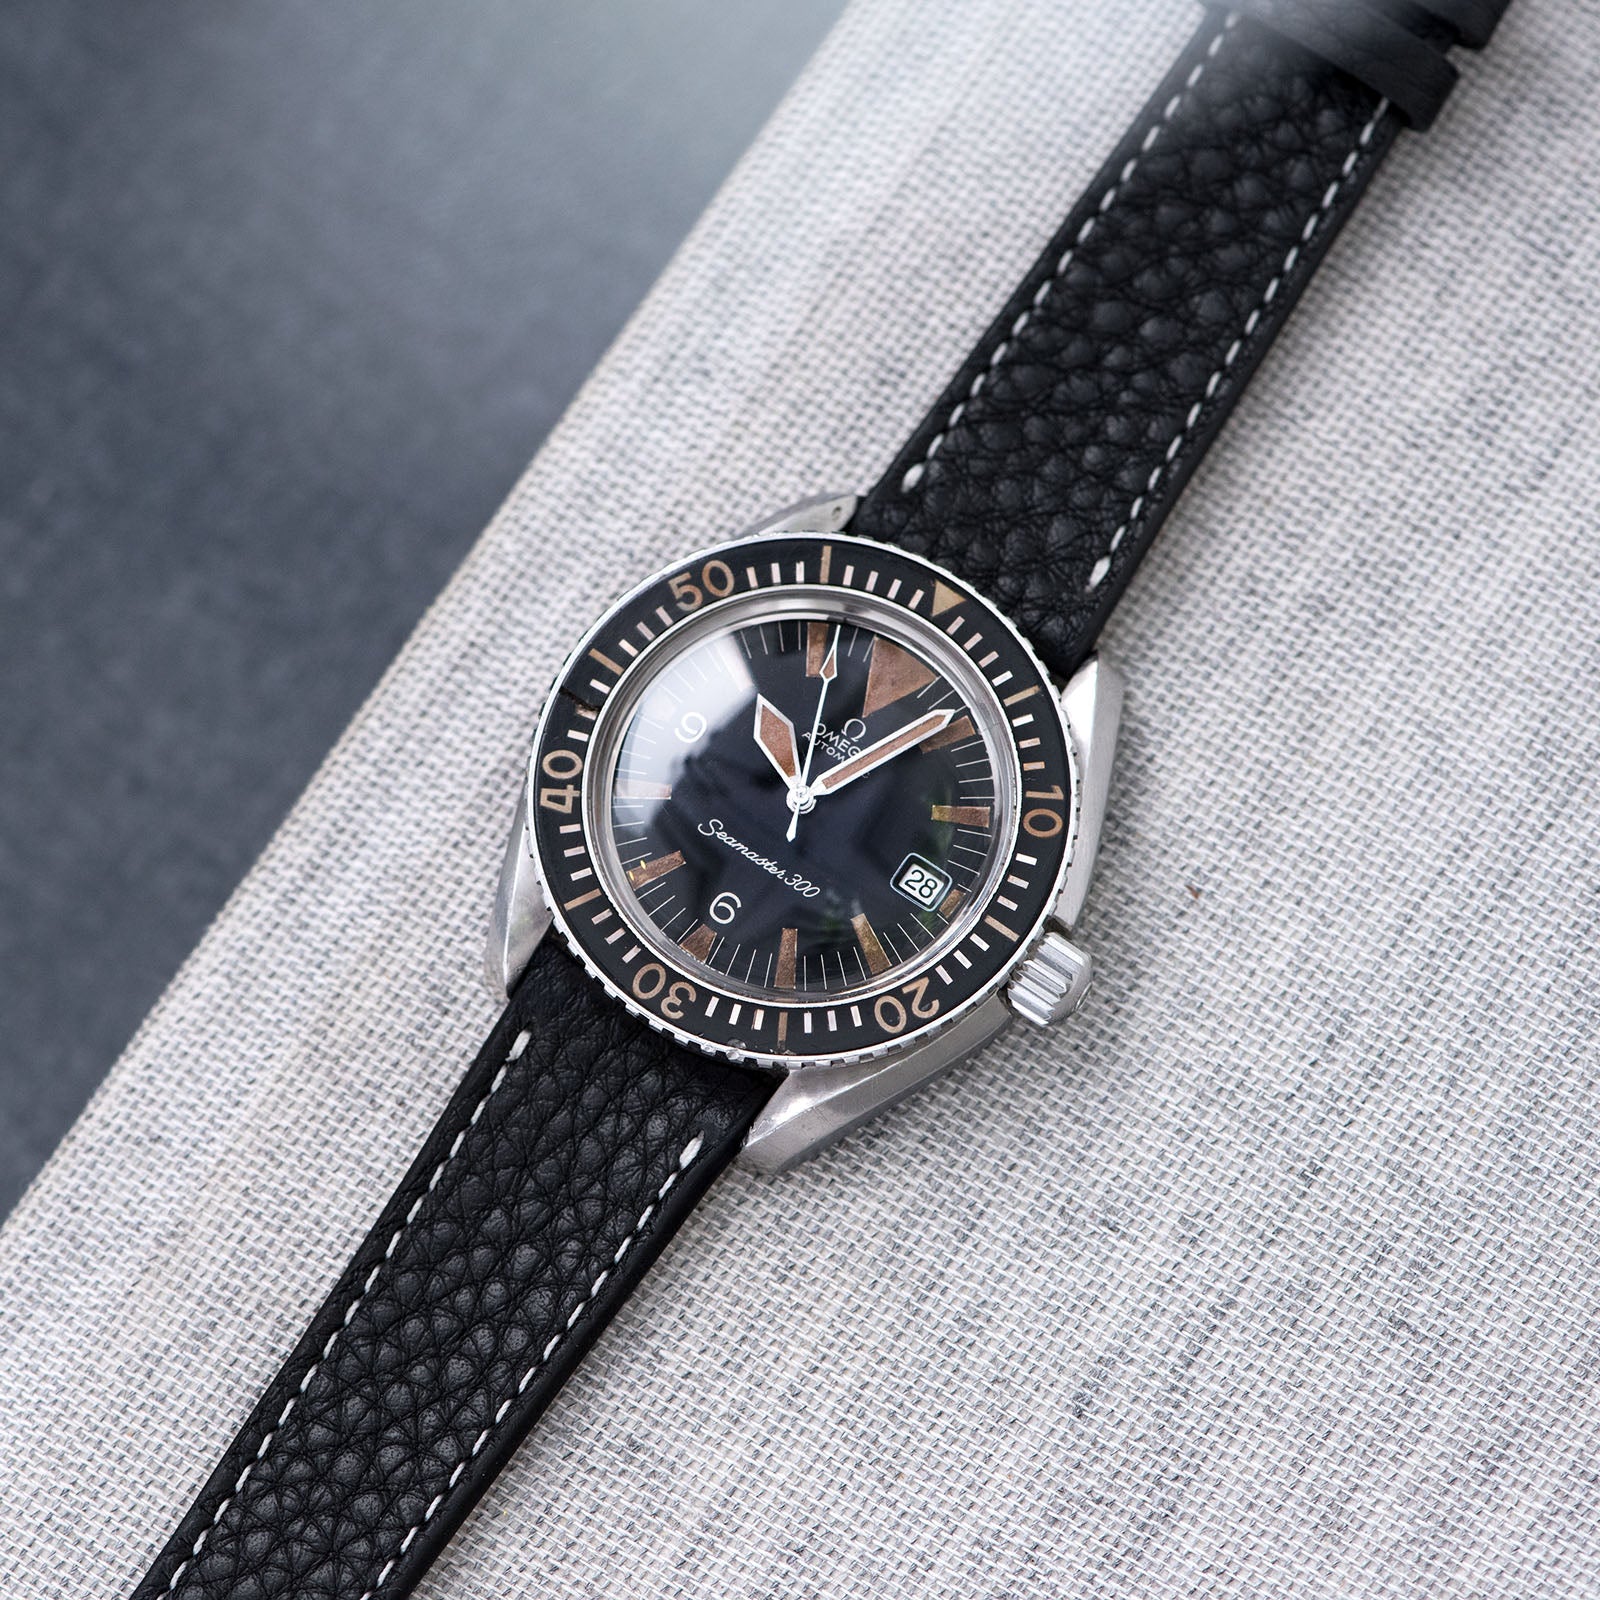 Bulang and Sons_Strap Guide_The omega SM 300 Seamaster_Rich Black Creme Stitch Leather Watch Strap